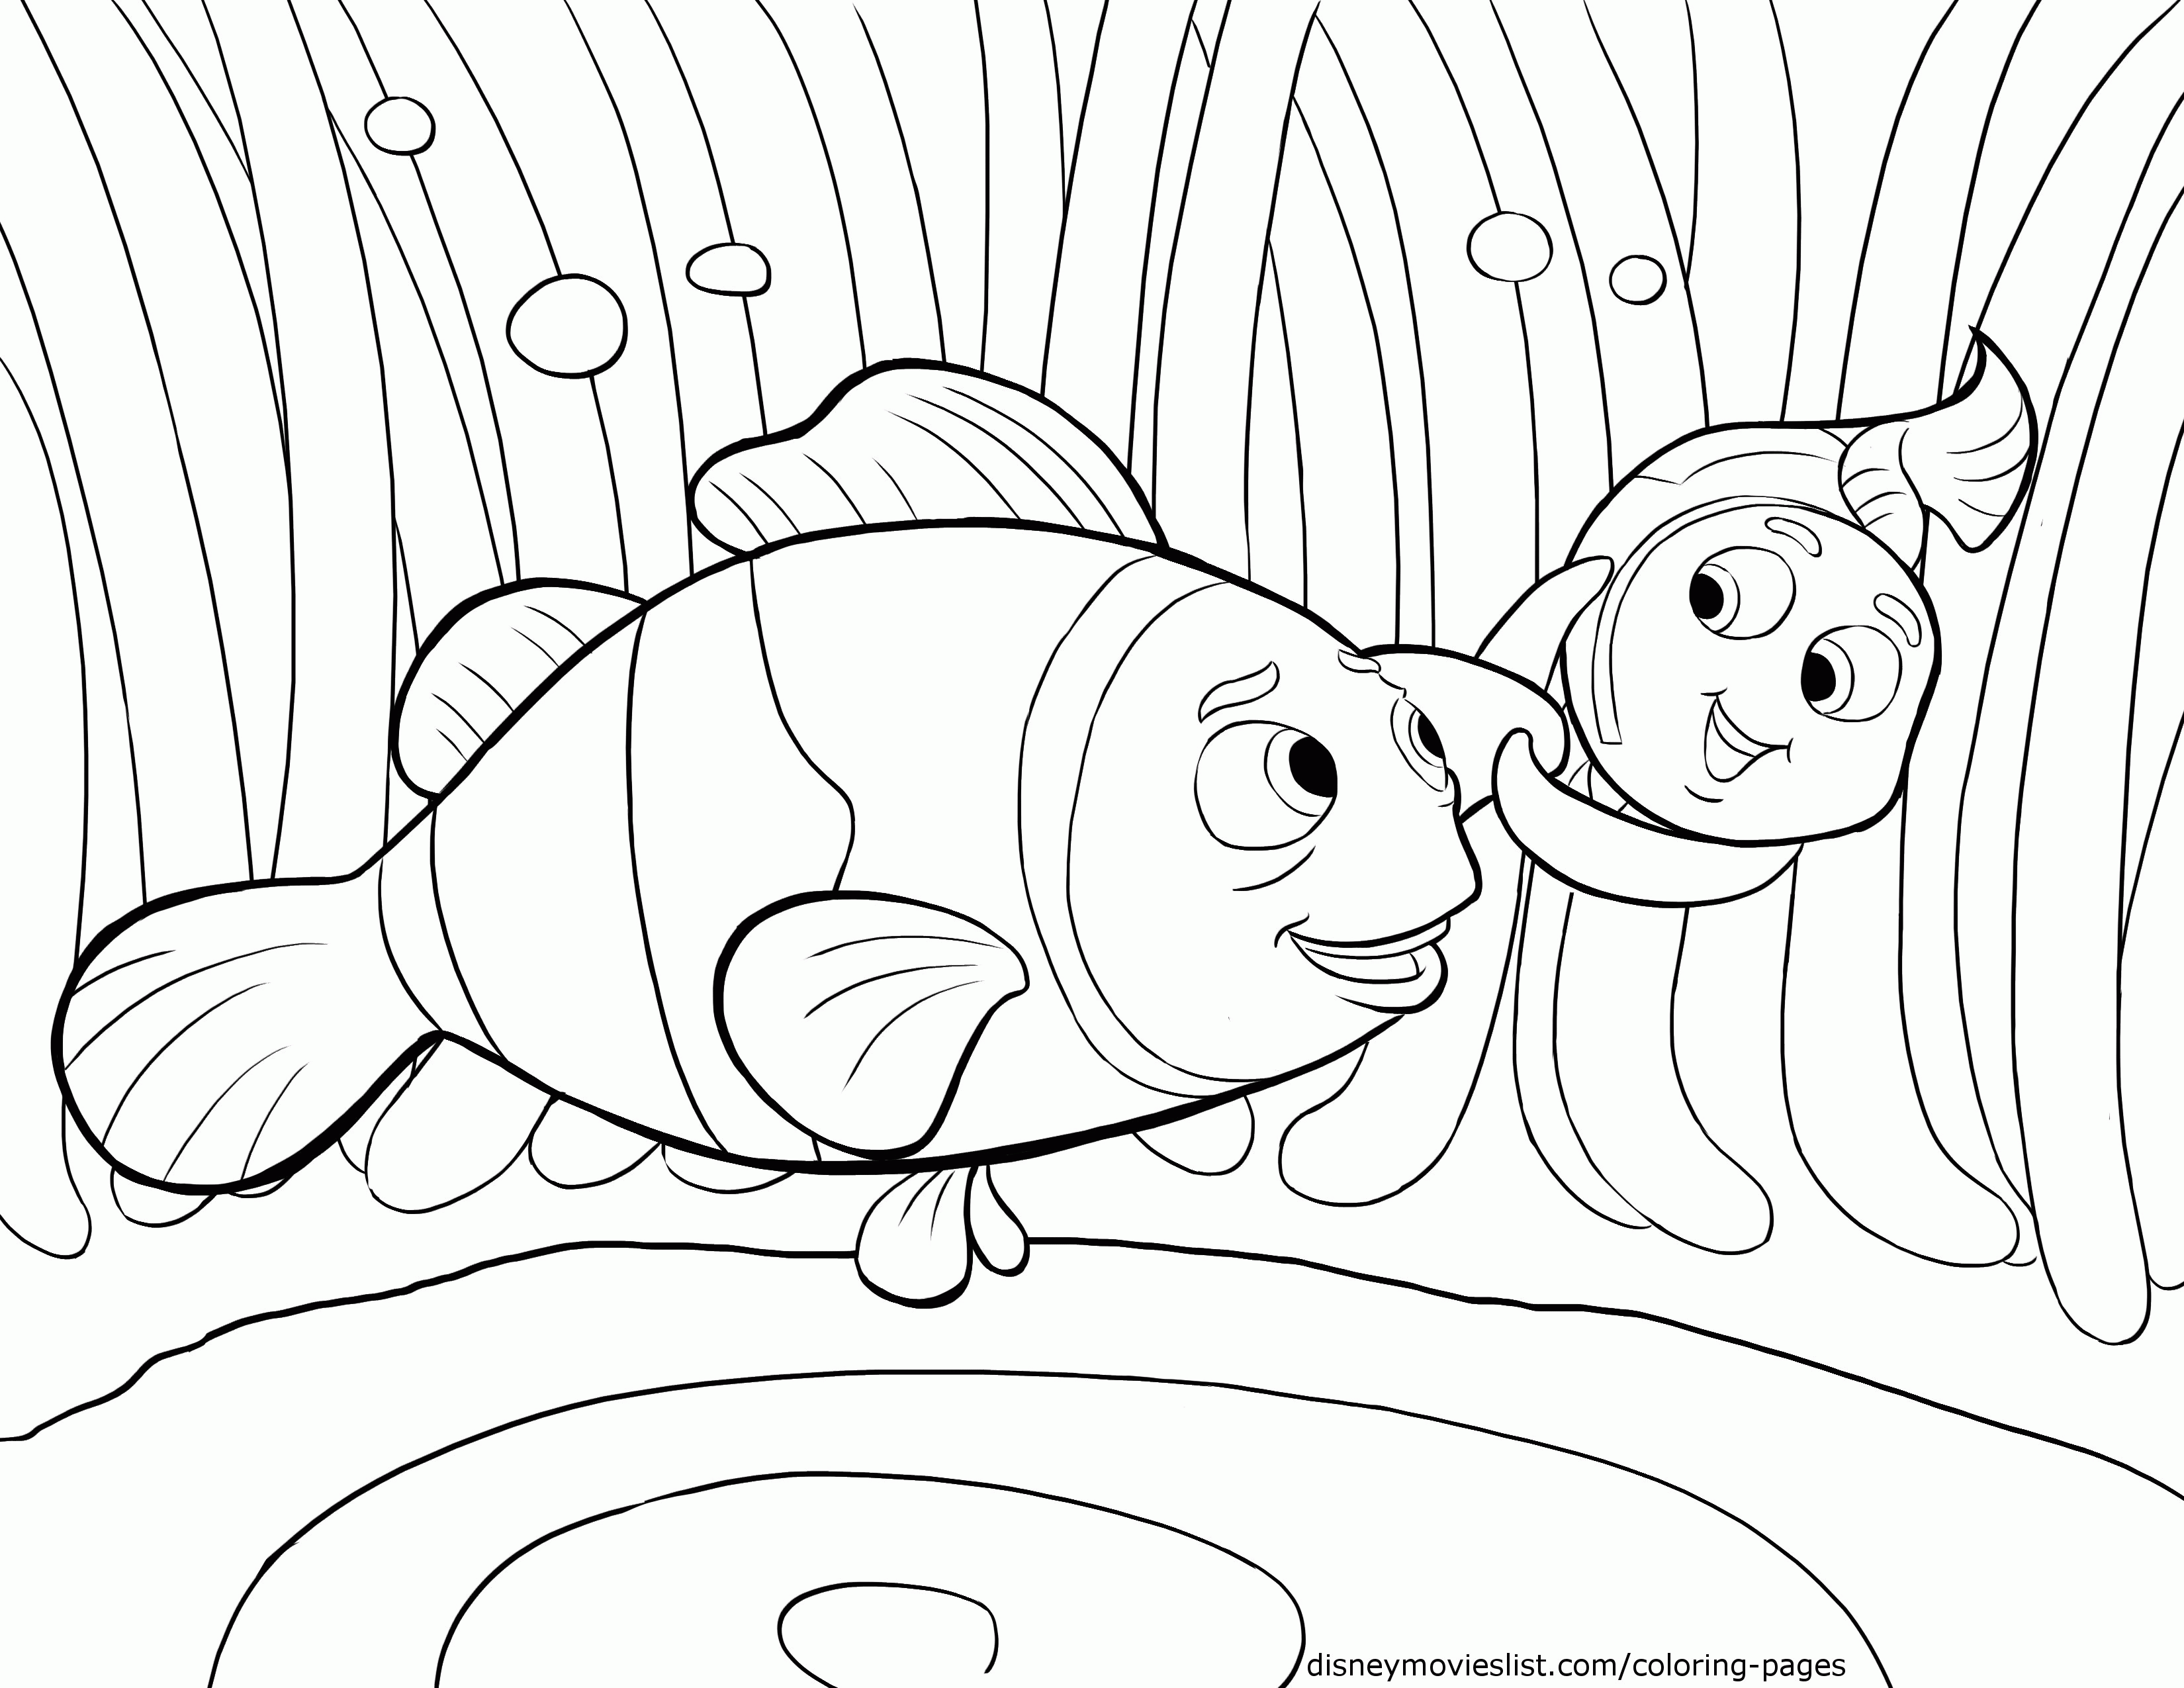 Marlin & Nemo   Disney's Finding Nemo Coloring Pages Sheet, Free ...